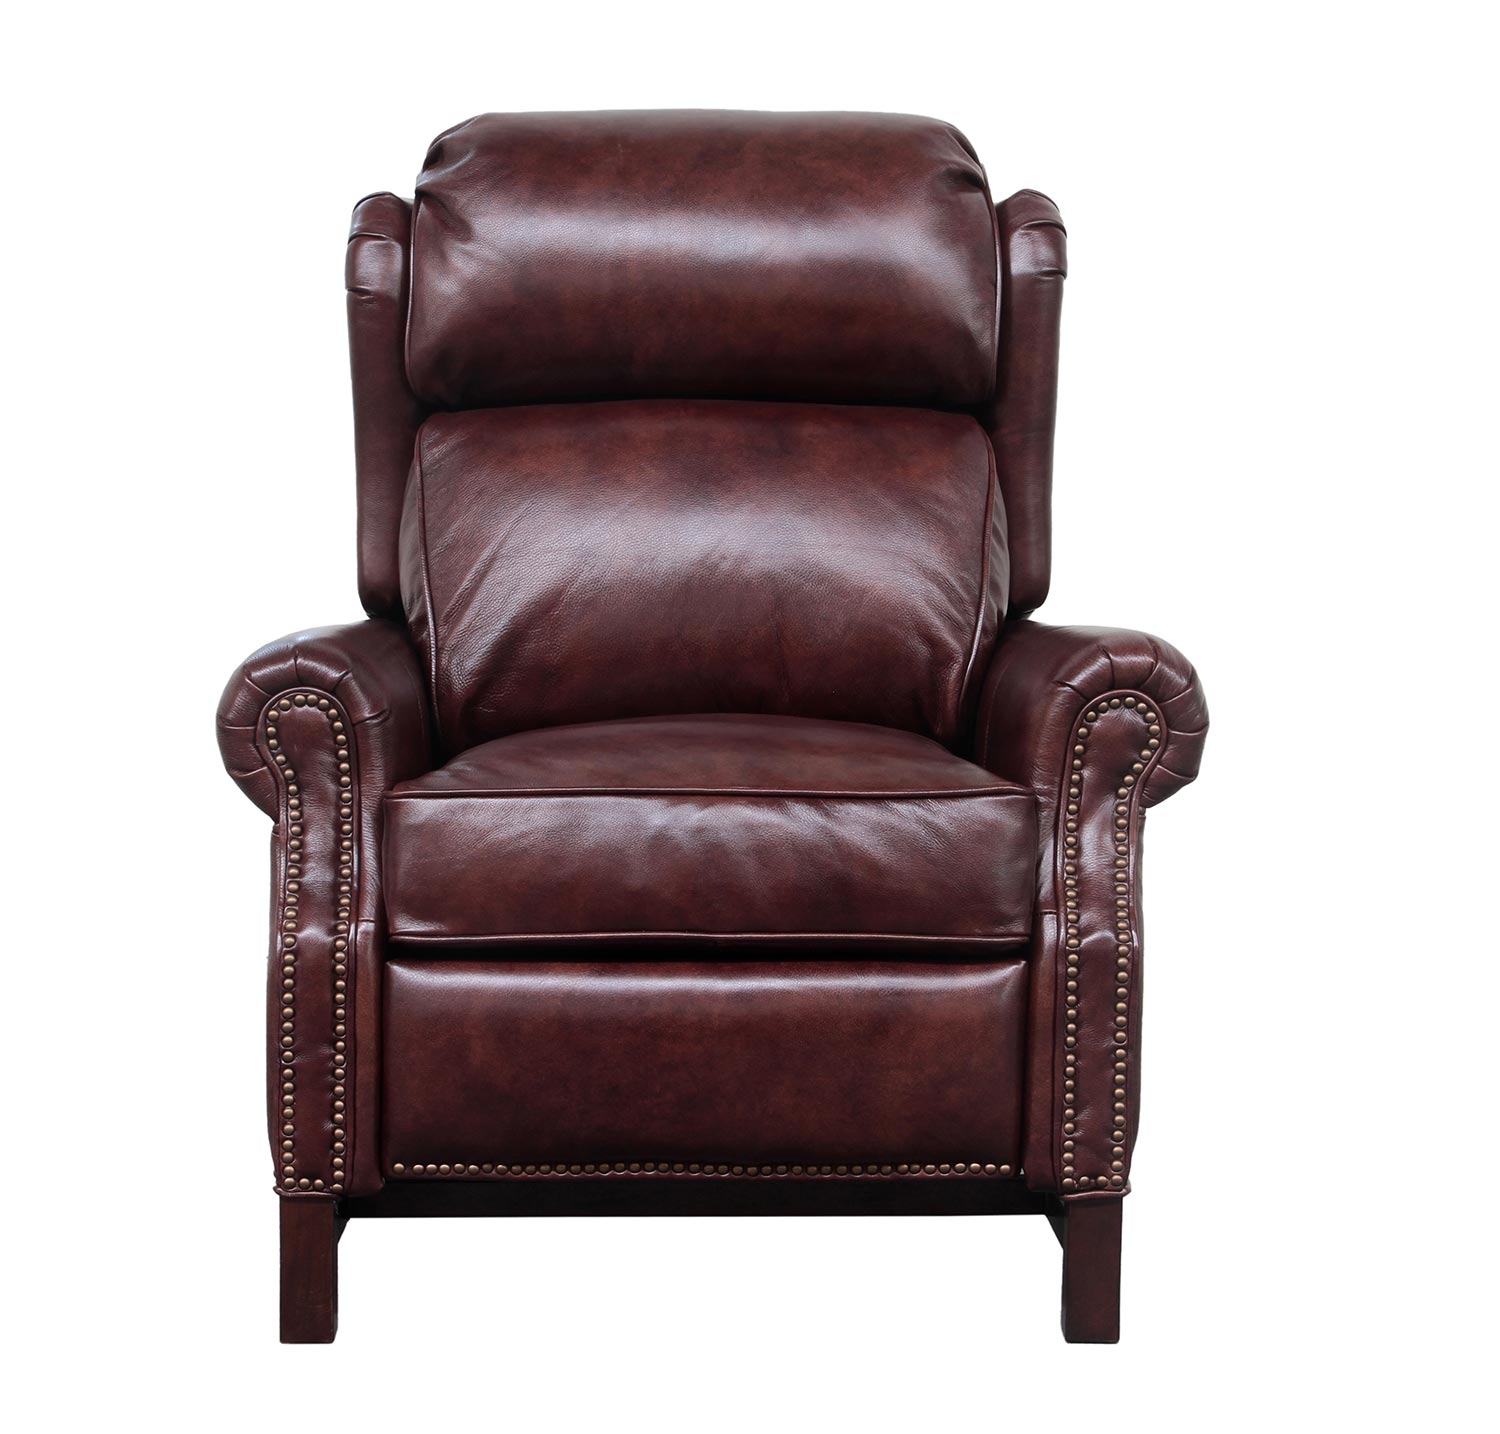 Barcalounger Thornfield Recliner Chair - Wenlock Fudge/All Leather